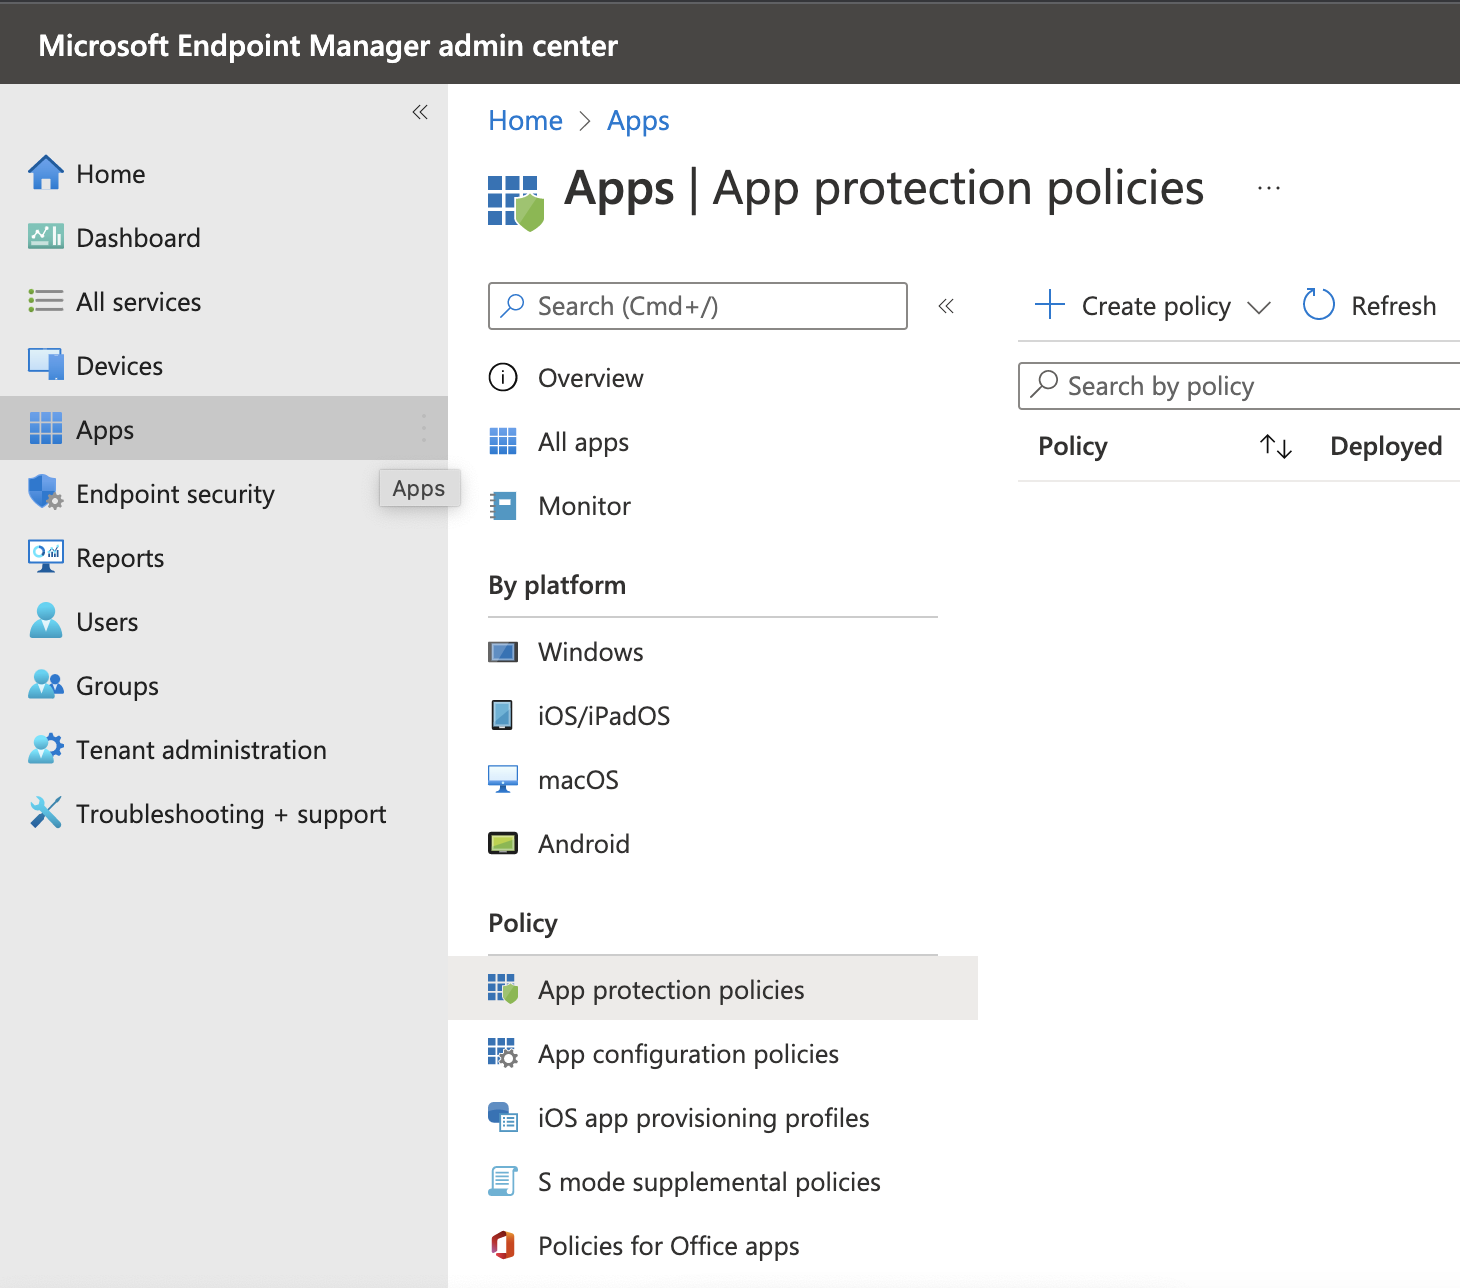 Access App protection policies